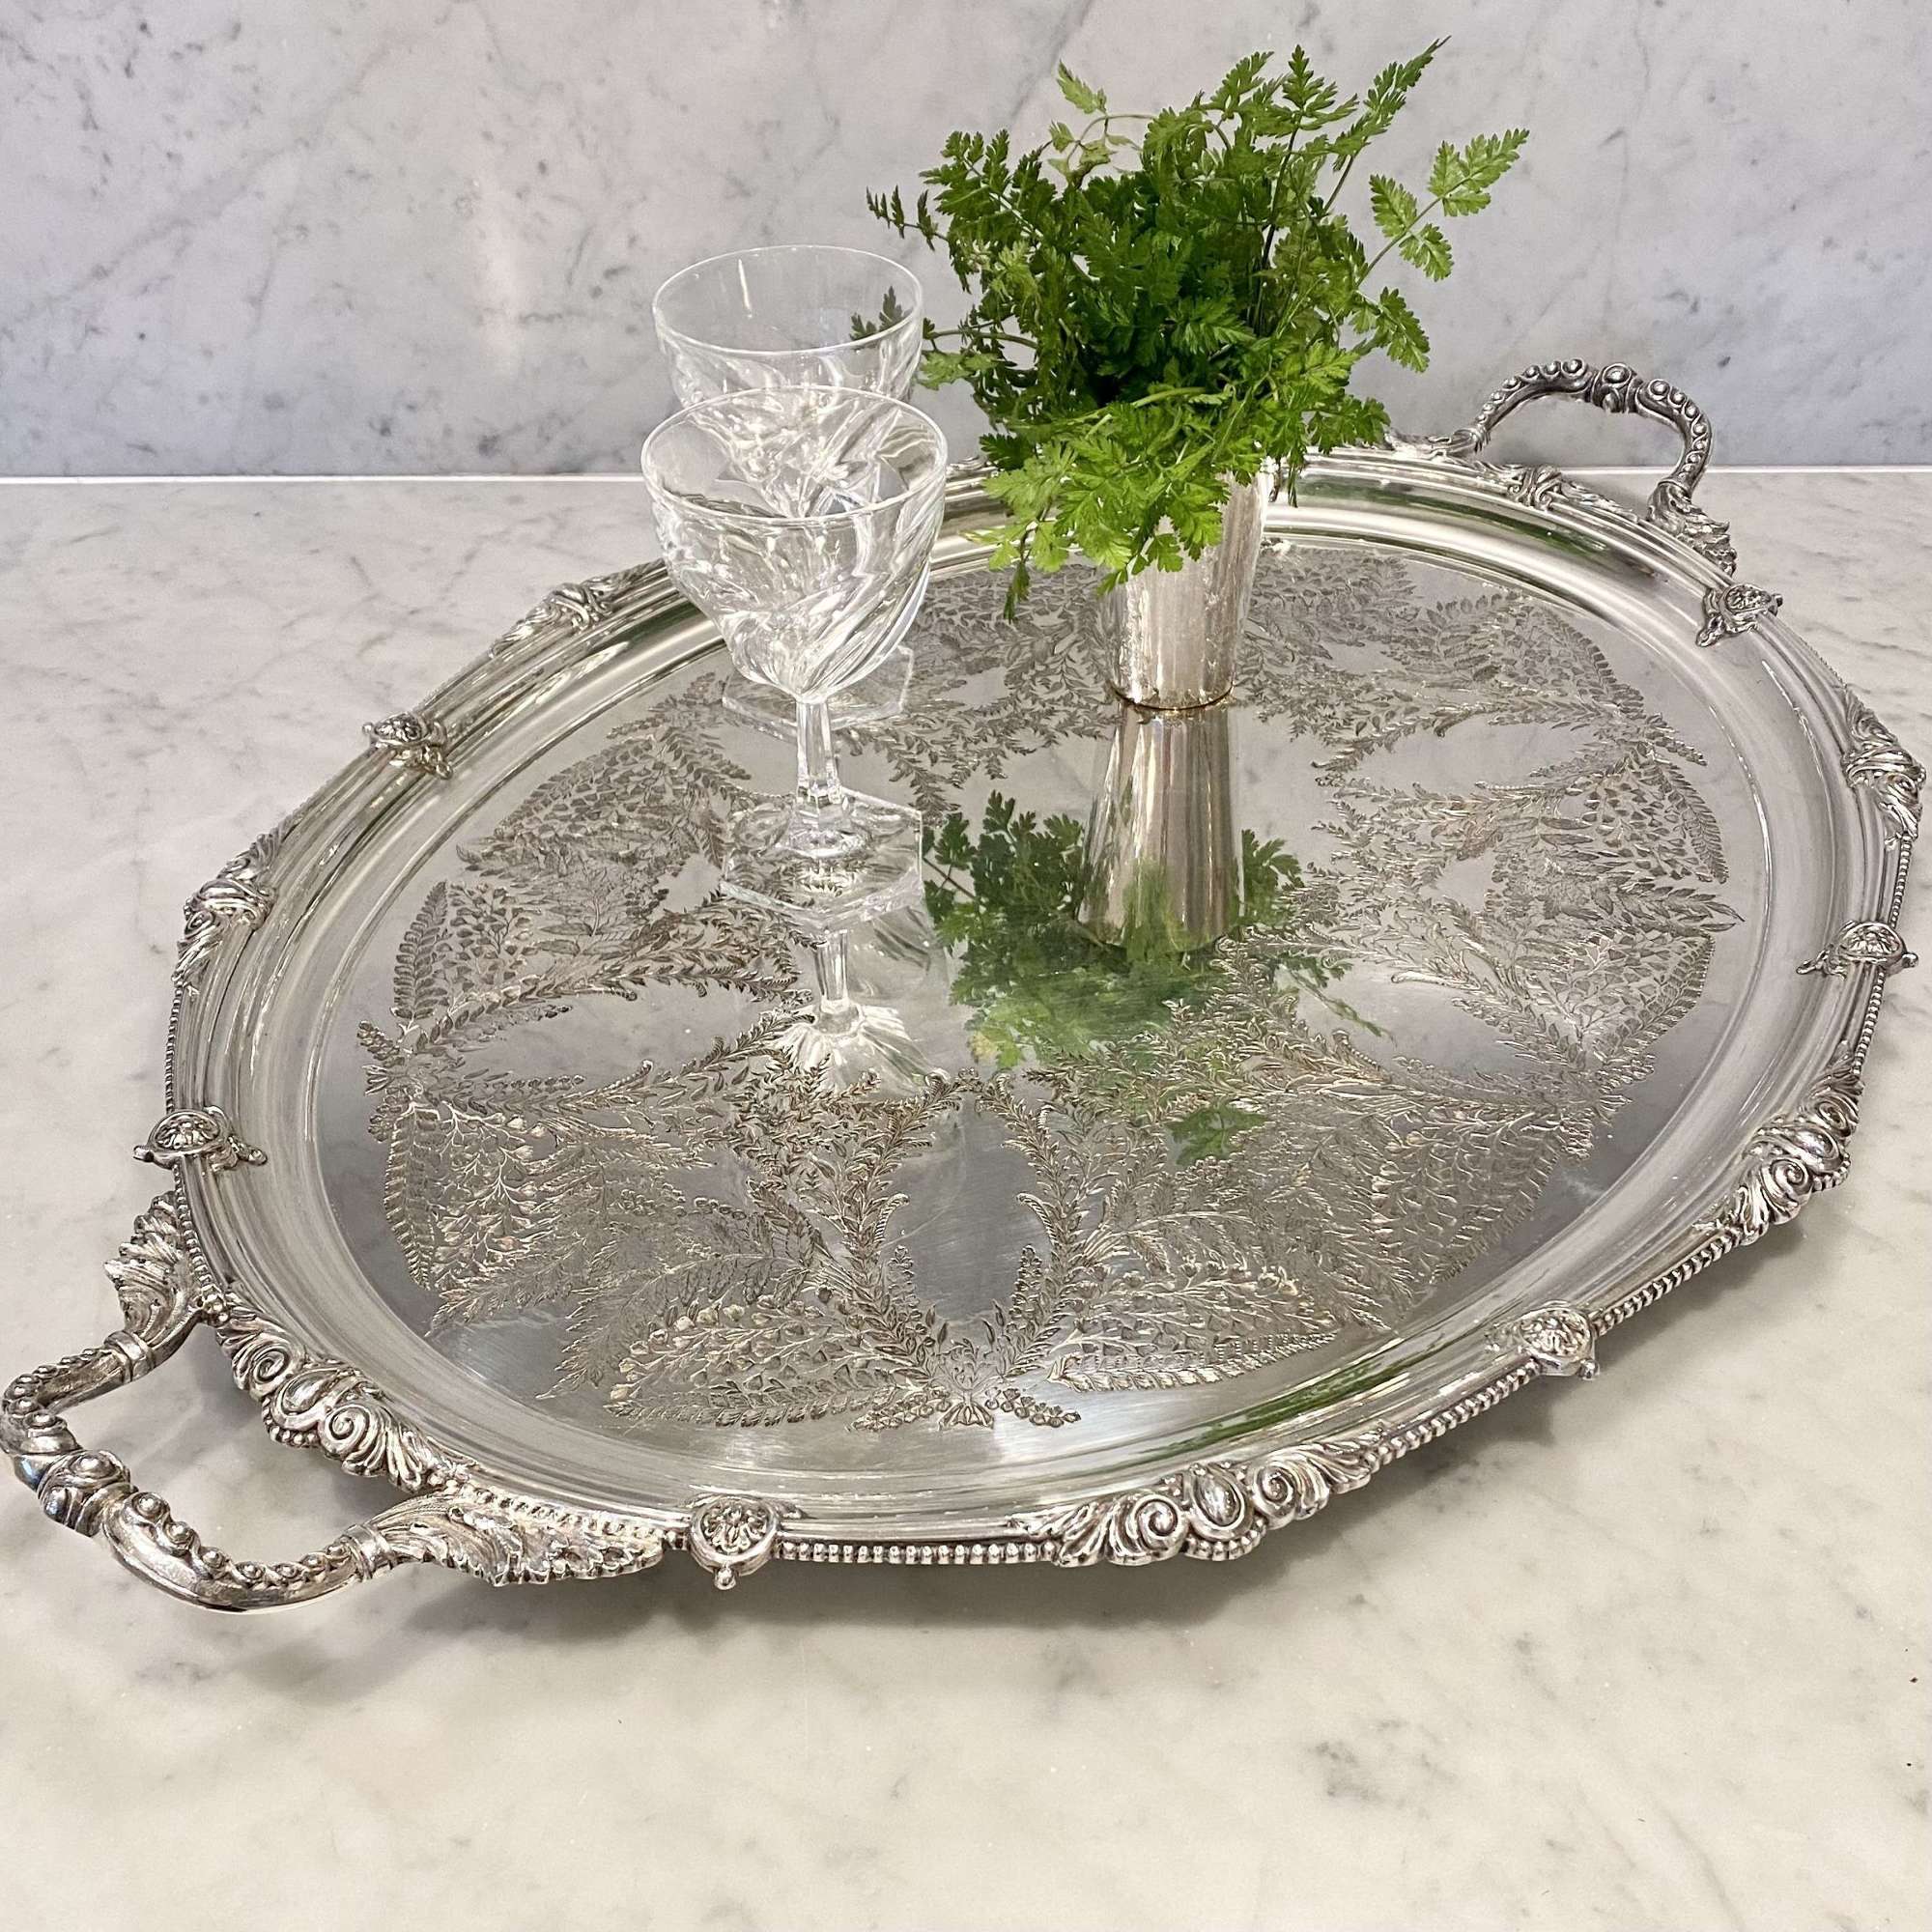 Superb quality fern etched Edwardian twin handled serving tray